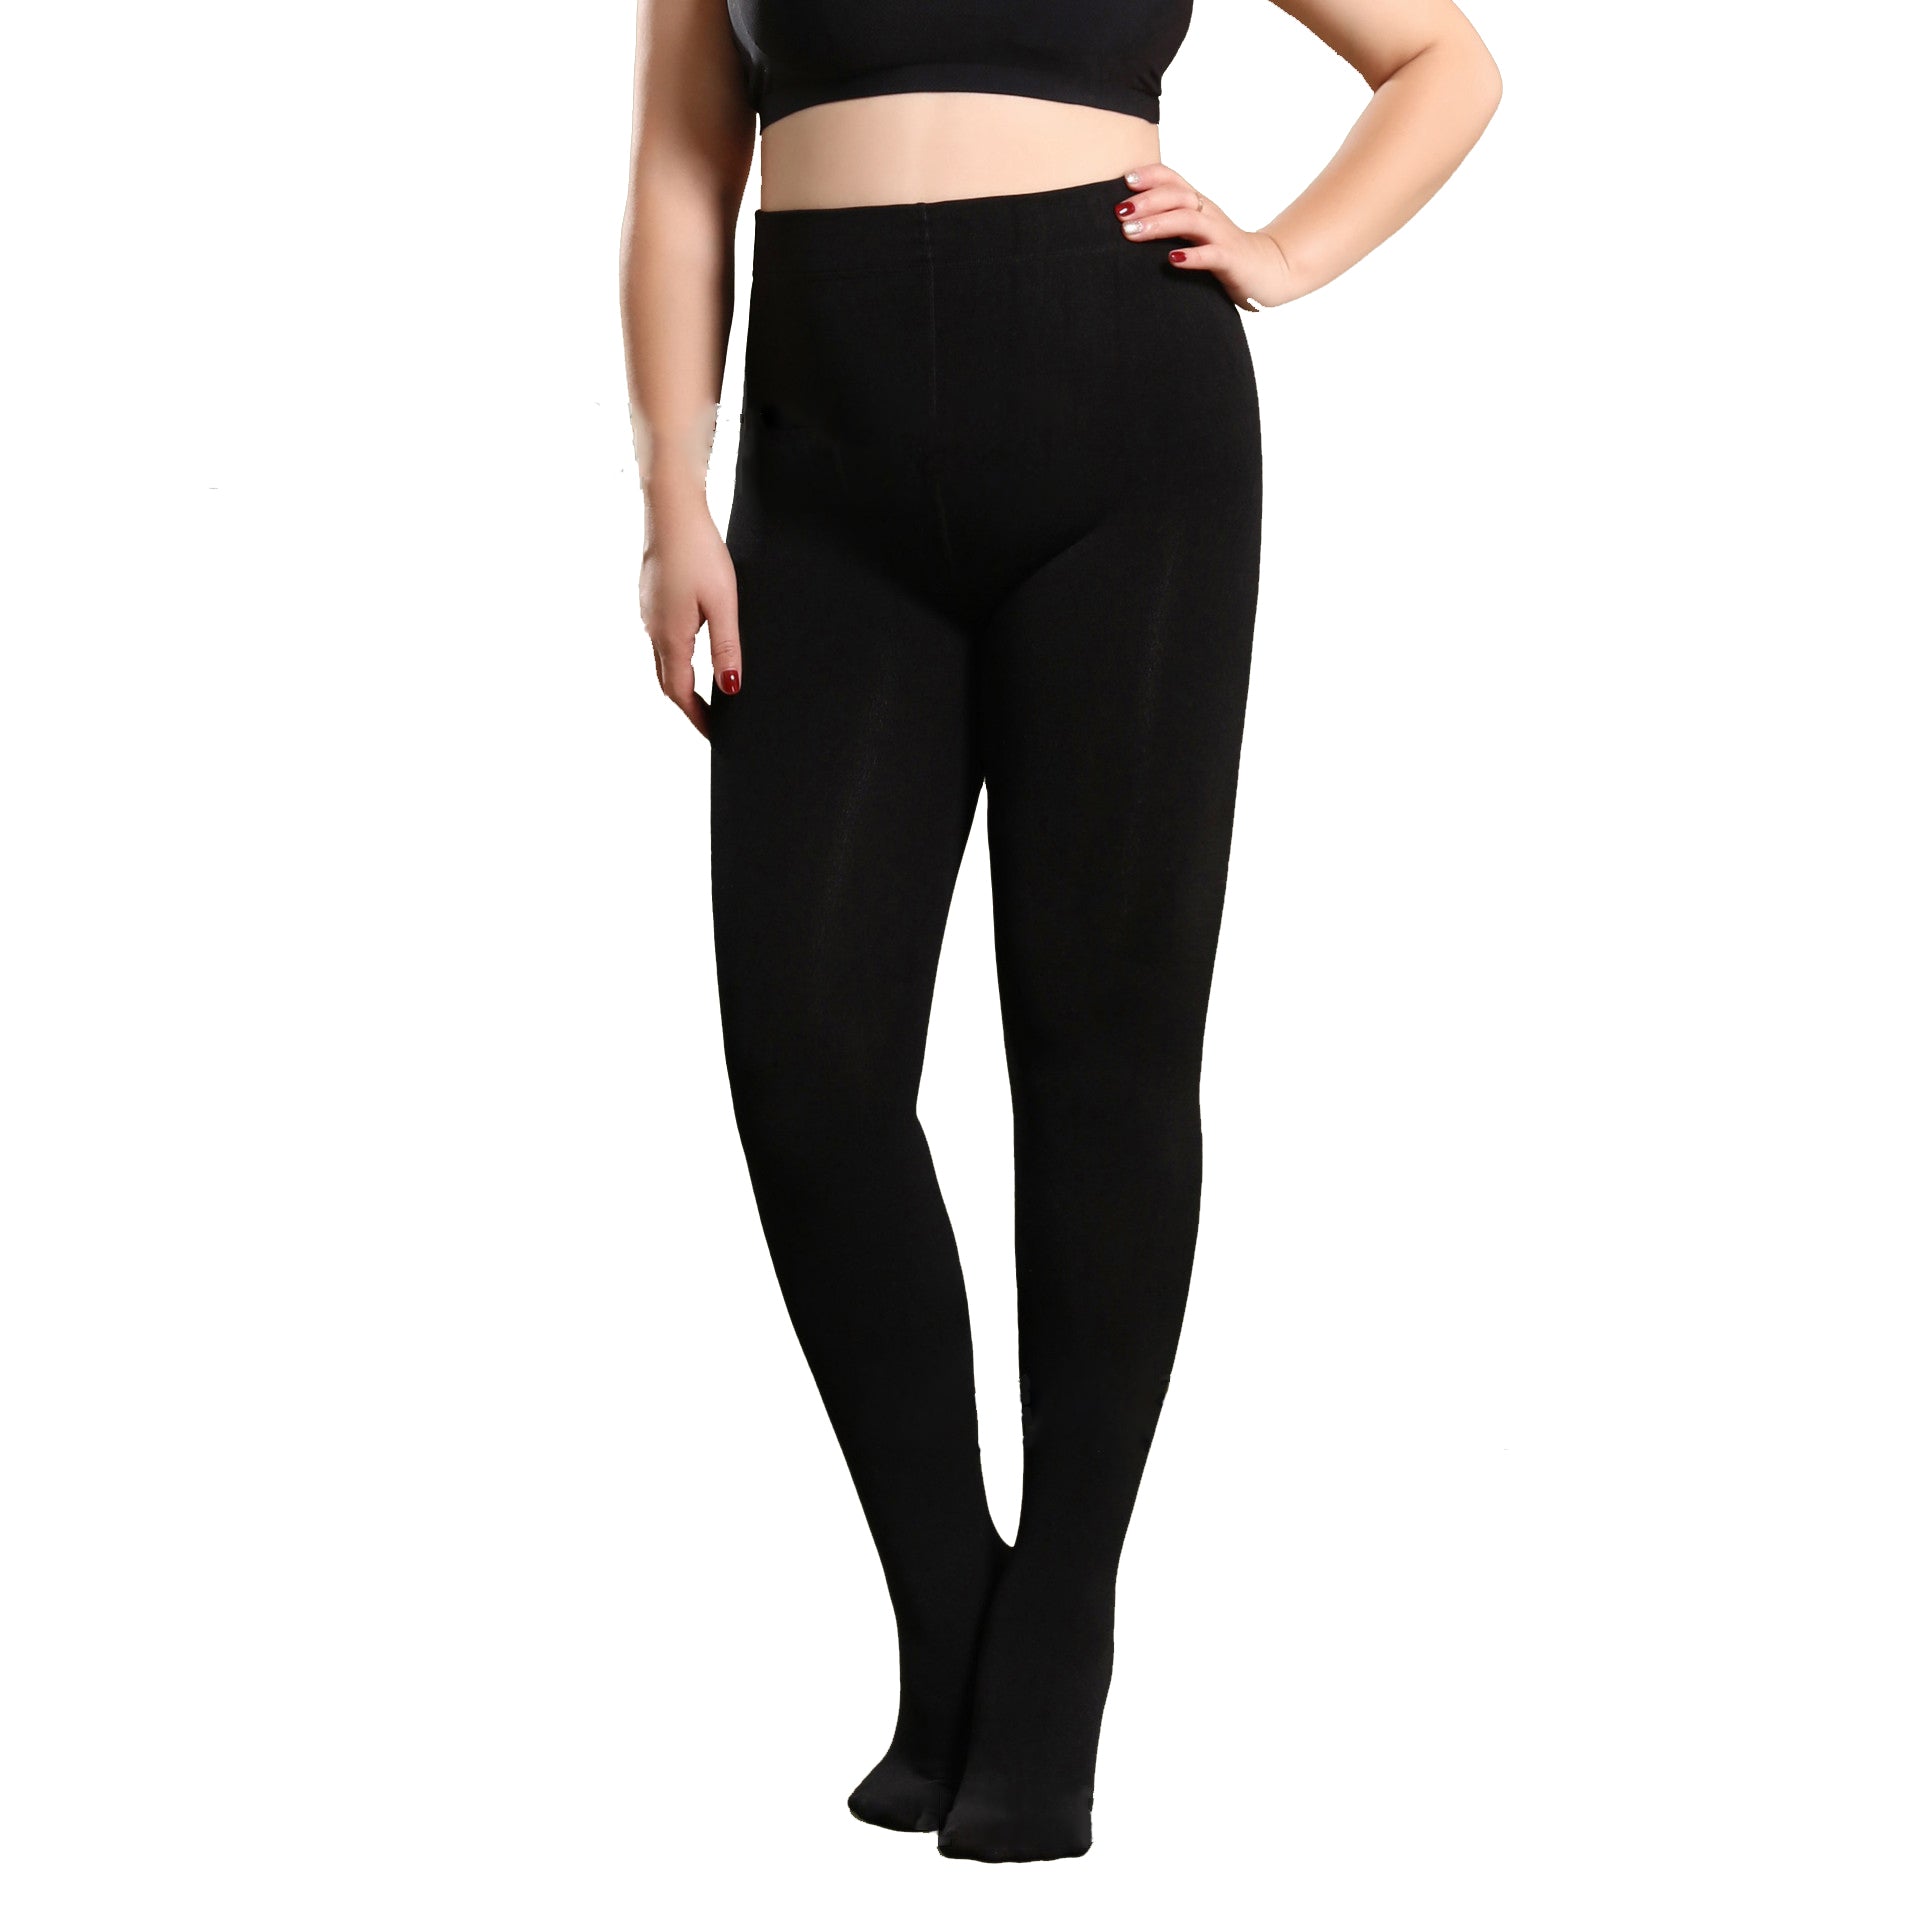 Pomapoma Women's Plus Size Thermal Tights - 500g